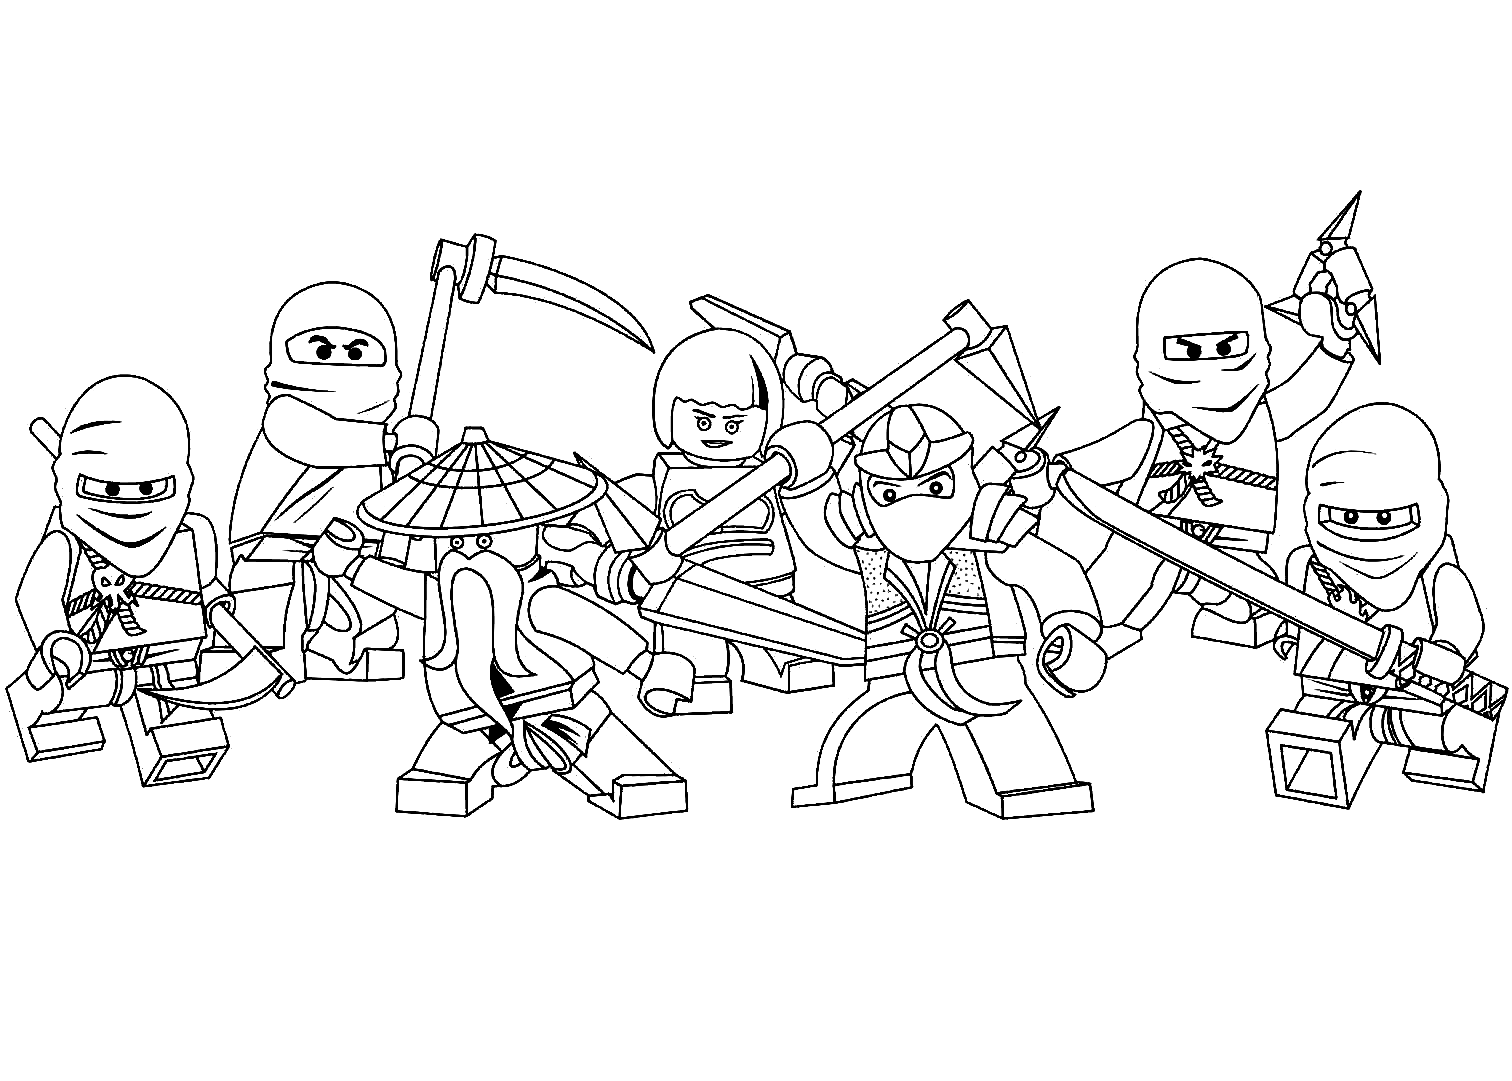 Team of Master Wu from Lego Ninjago Coloring Pages